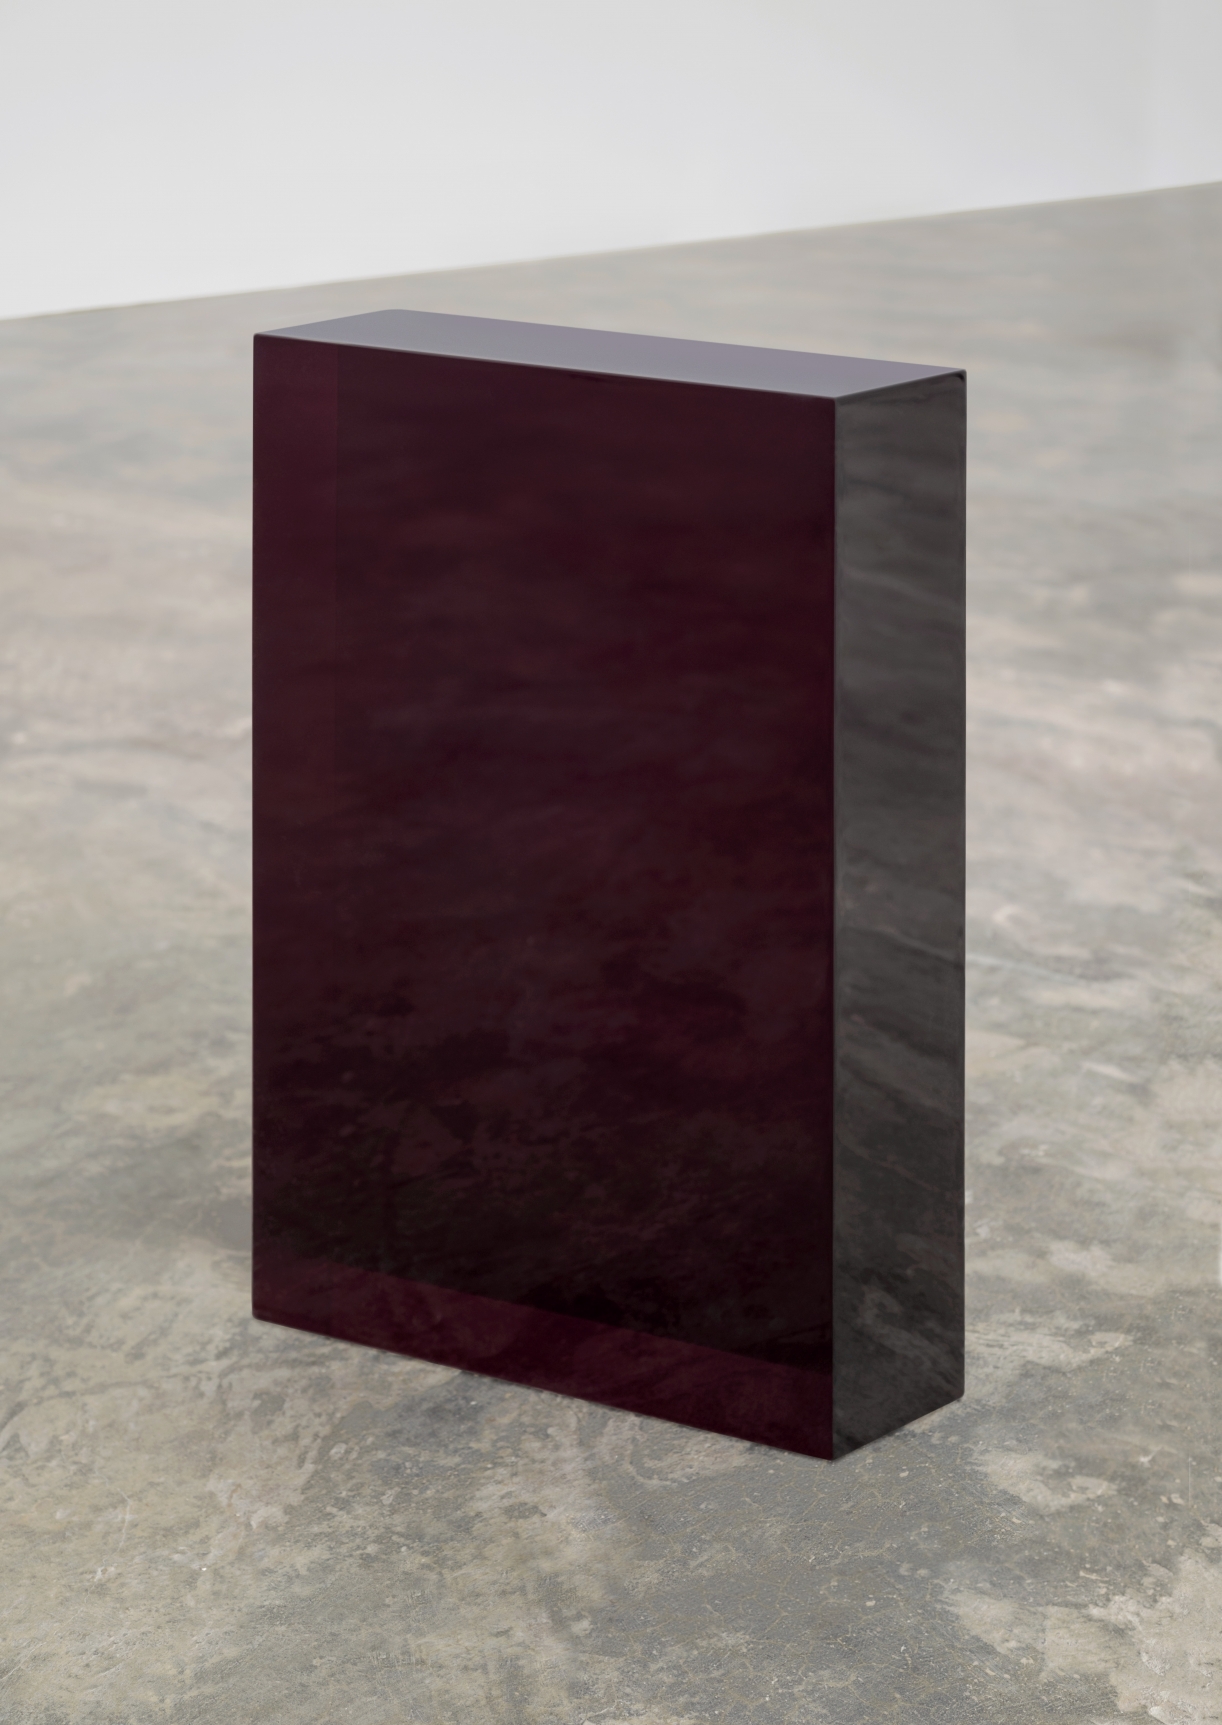 Tarik Kiswanson, In my blood, 2020, Resin with blood and pigment, unique, 40 x 28 x 9 cm